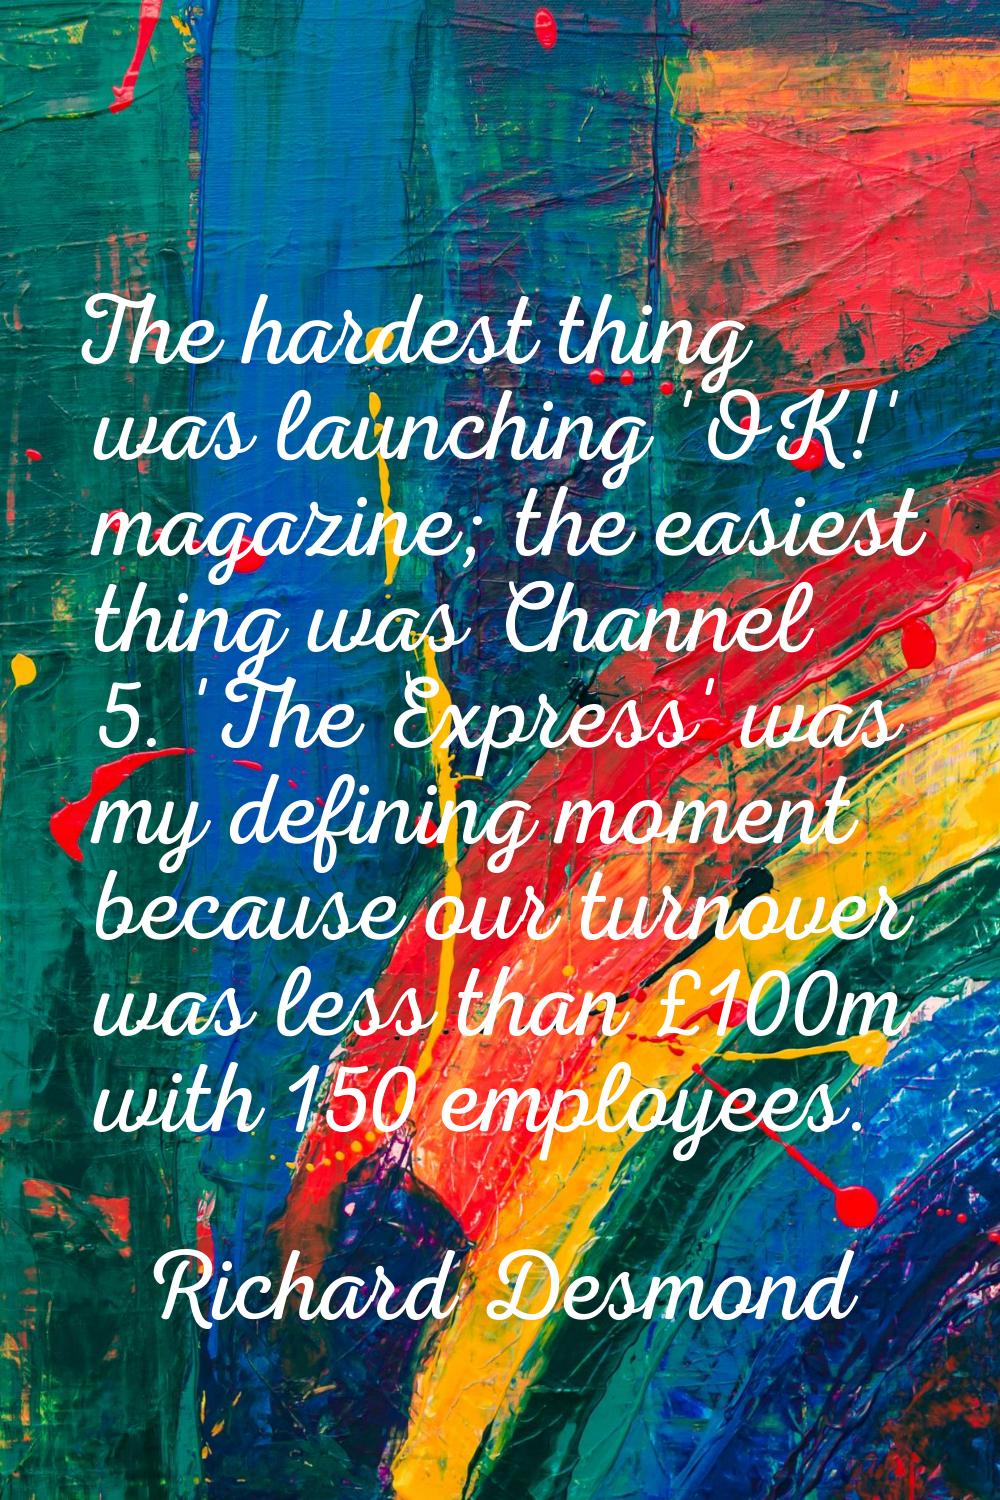 The hardest thing was launching 'OK!' magazine; the easiest thing was Channel 5. 'The Express' was 